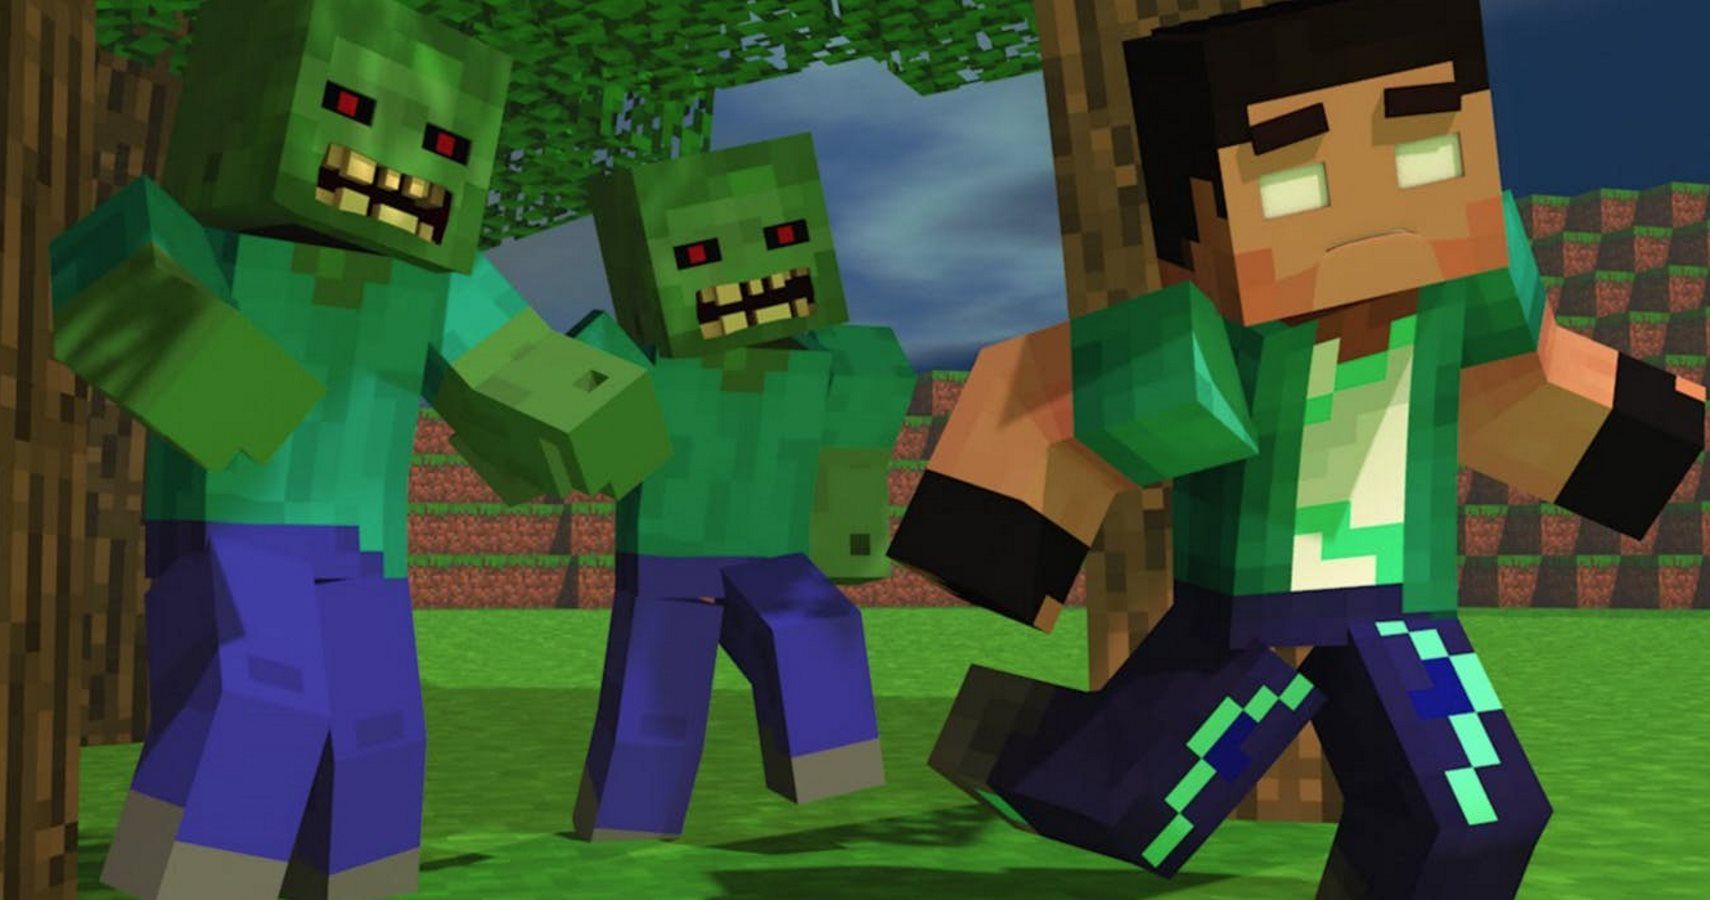 Minecraft Movie In Limbo After Losing Director - And Release Date